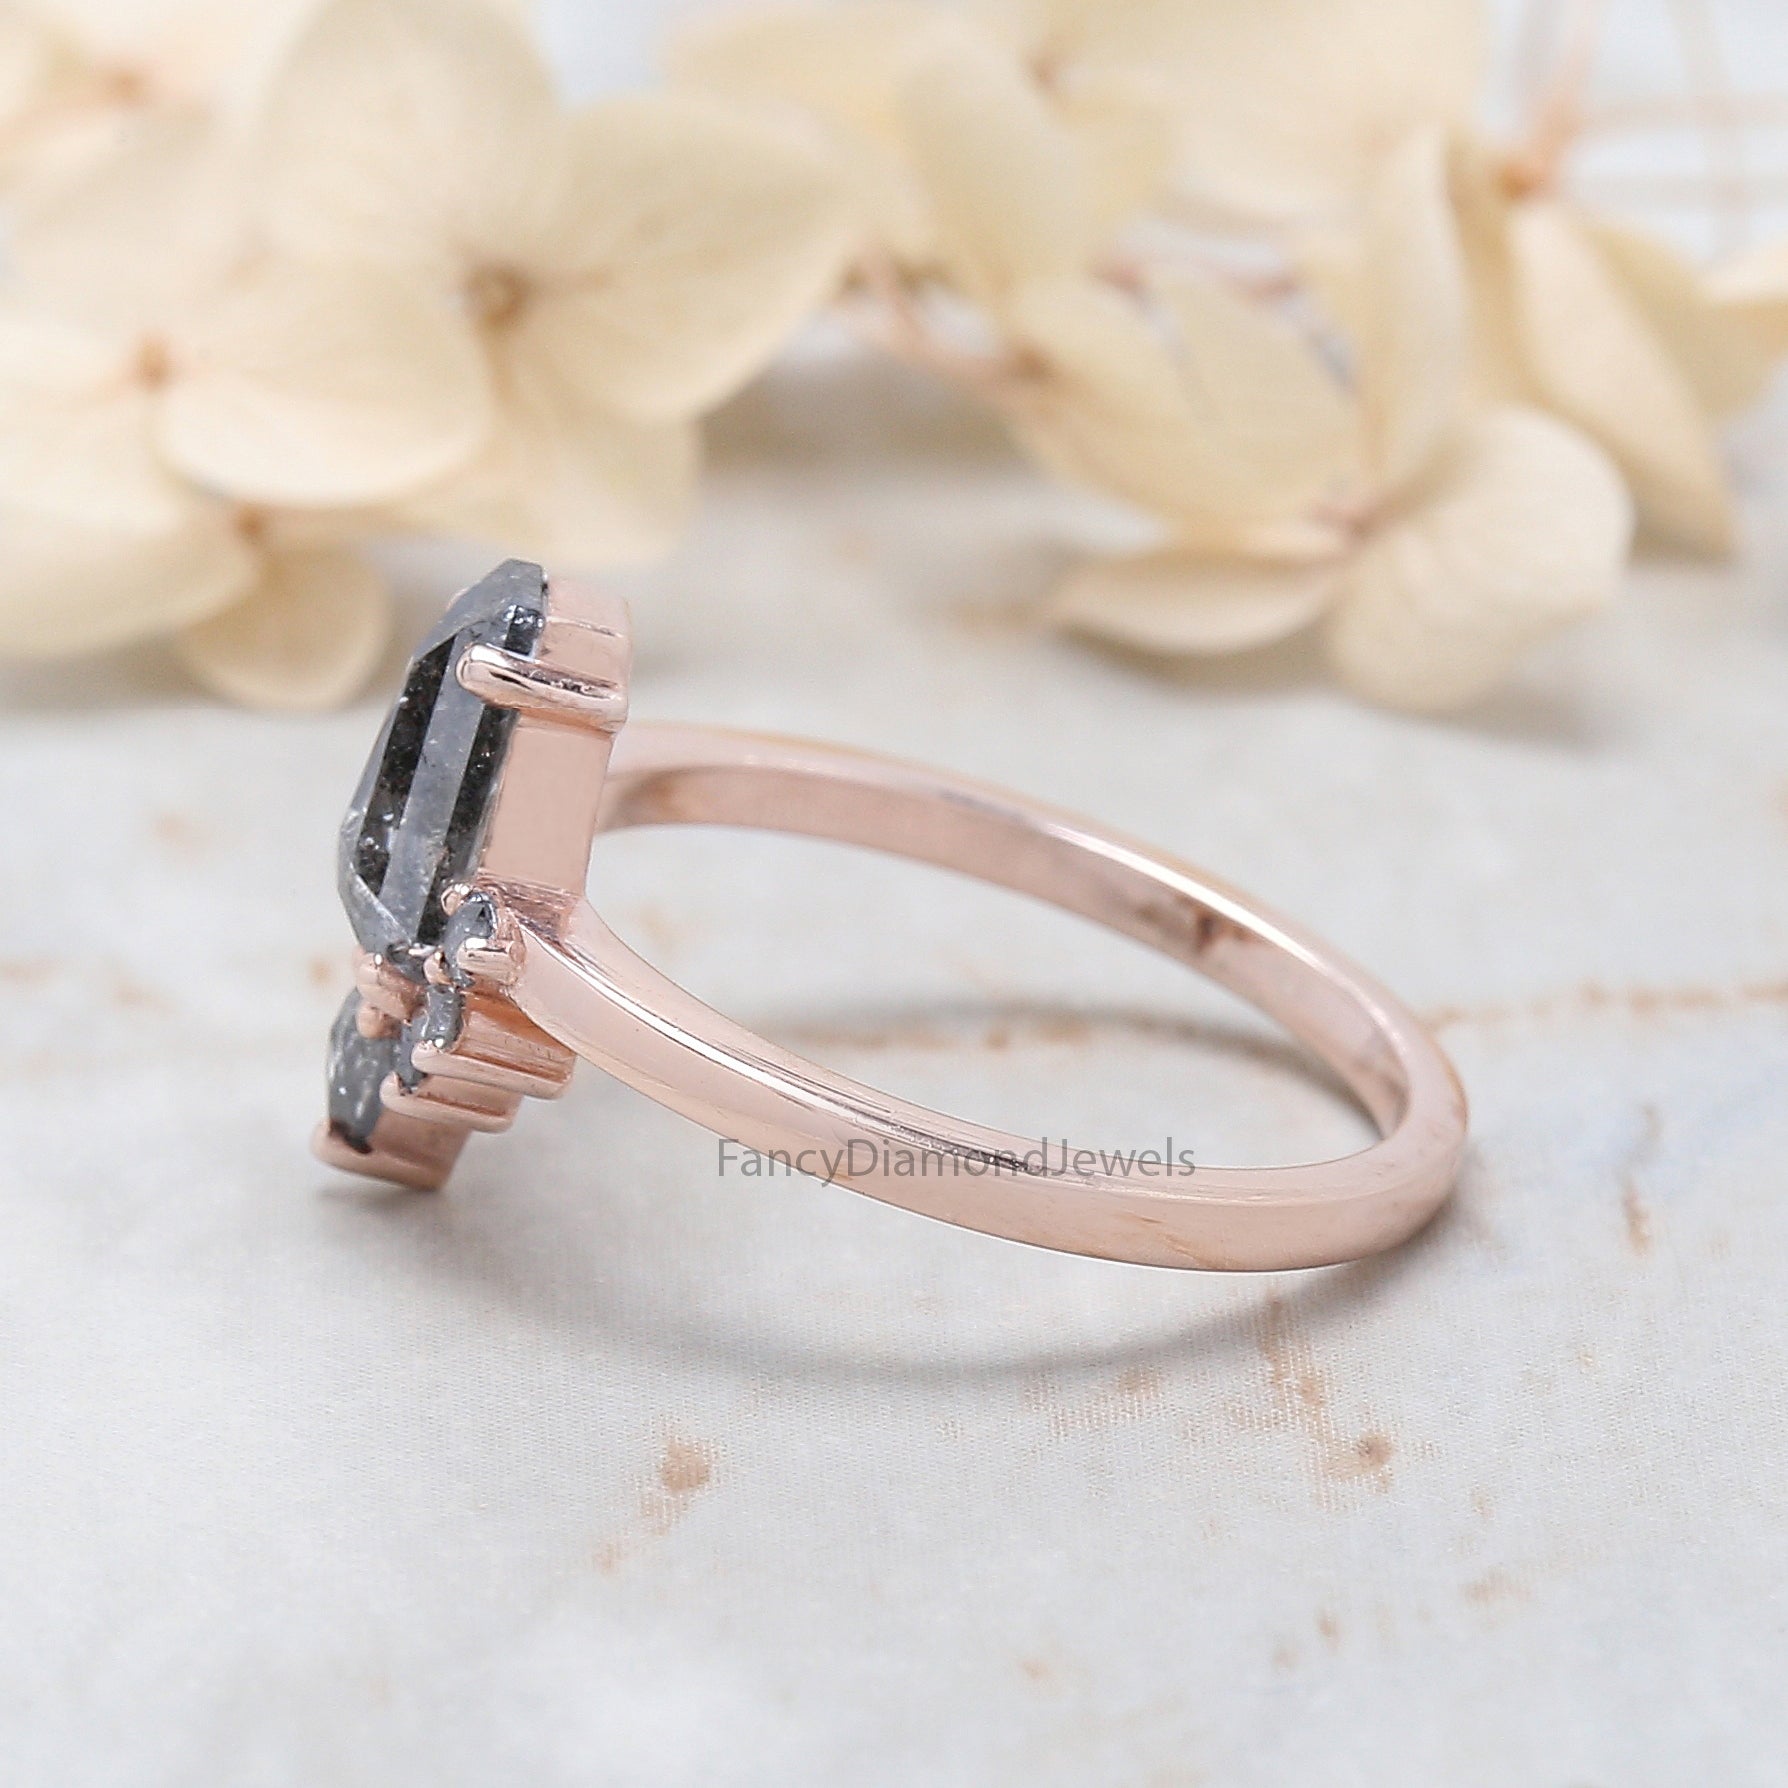 Coffin Cut Salt And Pepper Diamond Ring 1.08 Ct 7.75 MM Coffin Diamond Ring 14K Solid Rose Gold Silver Engagement Ring Gift For Her QL1425